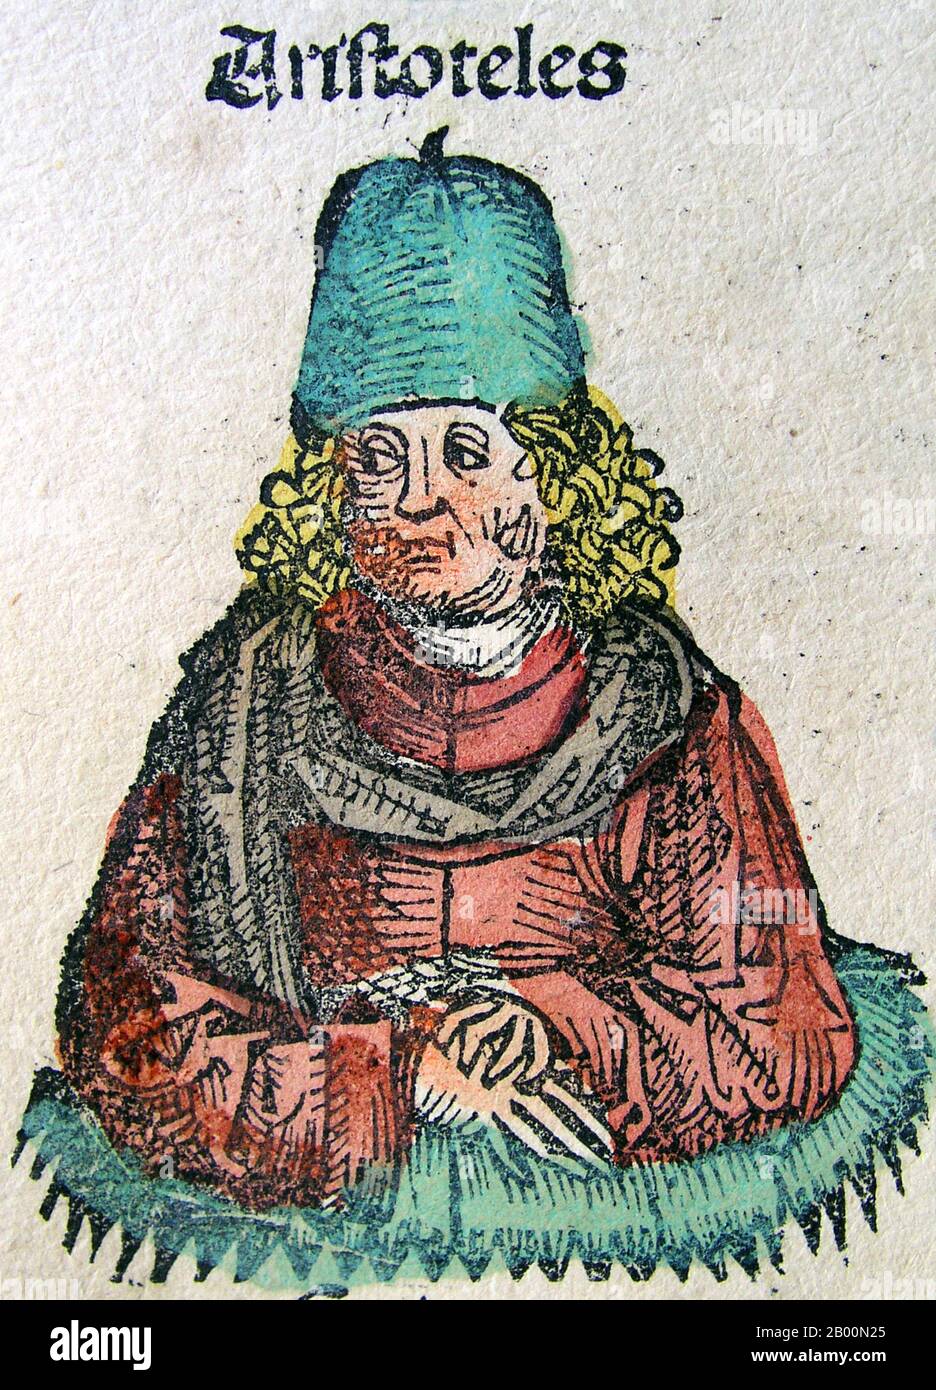 Germany: 'Aristotle'. The Nuremberg Chronicle, by Hartmann Schedel (1440-1514), 1493.  The Nuremberg Chronicle is an illustrated world history. Its structure follows the story of human history as related in the Bible; it includes the histories of a number of important Western cities. Written in Latin by Hartmann Schedel, with a version in German translation by Georg Alt, it appeared in 1493. It is one of the best-documented early printed books. It is classified as an incunabulum – that is, a book, pamphlet, or broadside that was printed (not handwritten) before the year 1501 in Europe. Stock Photo